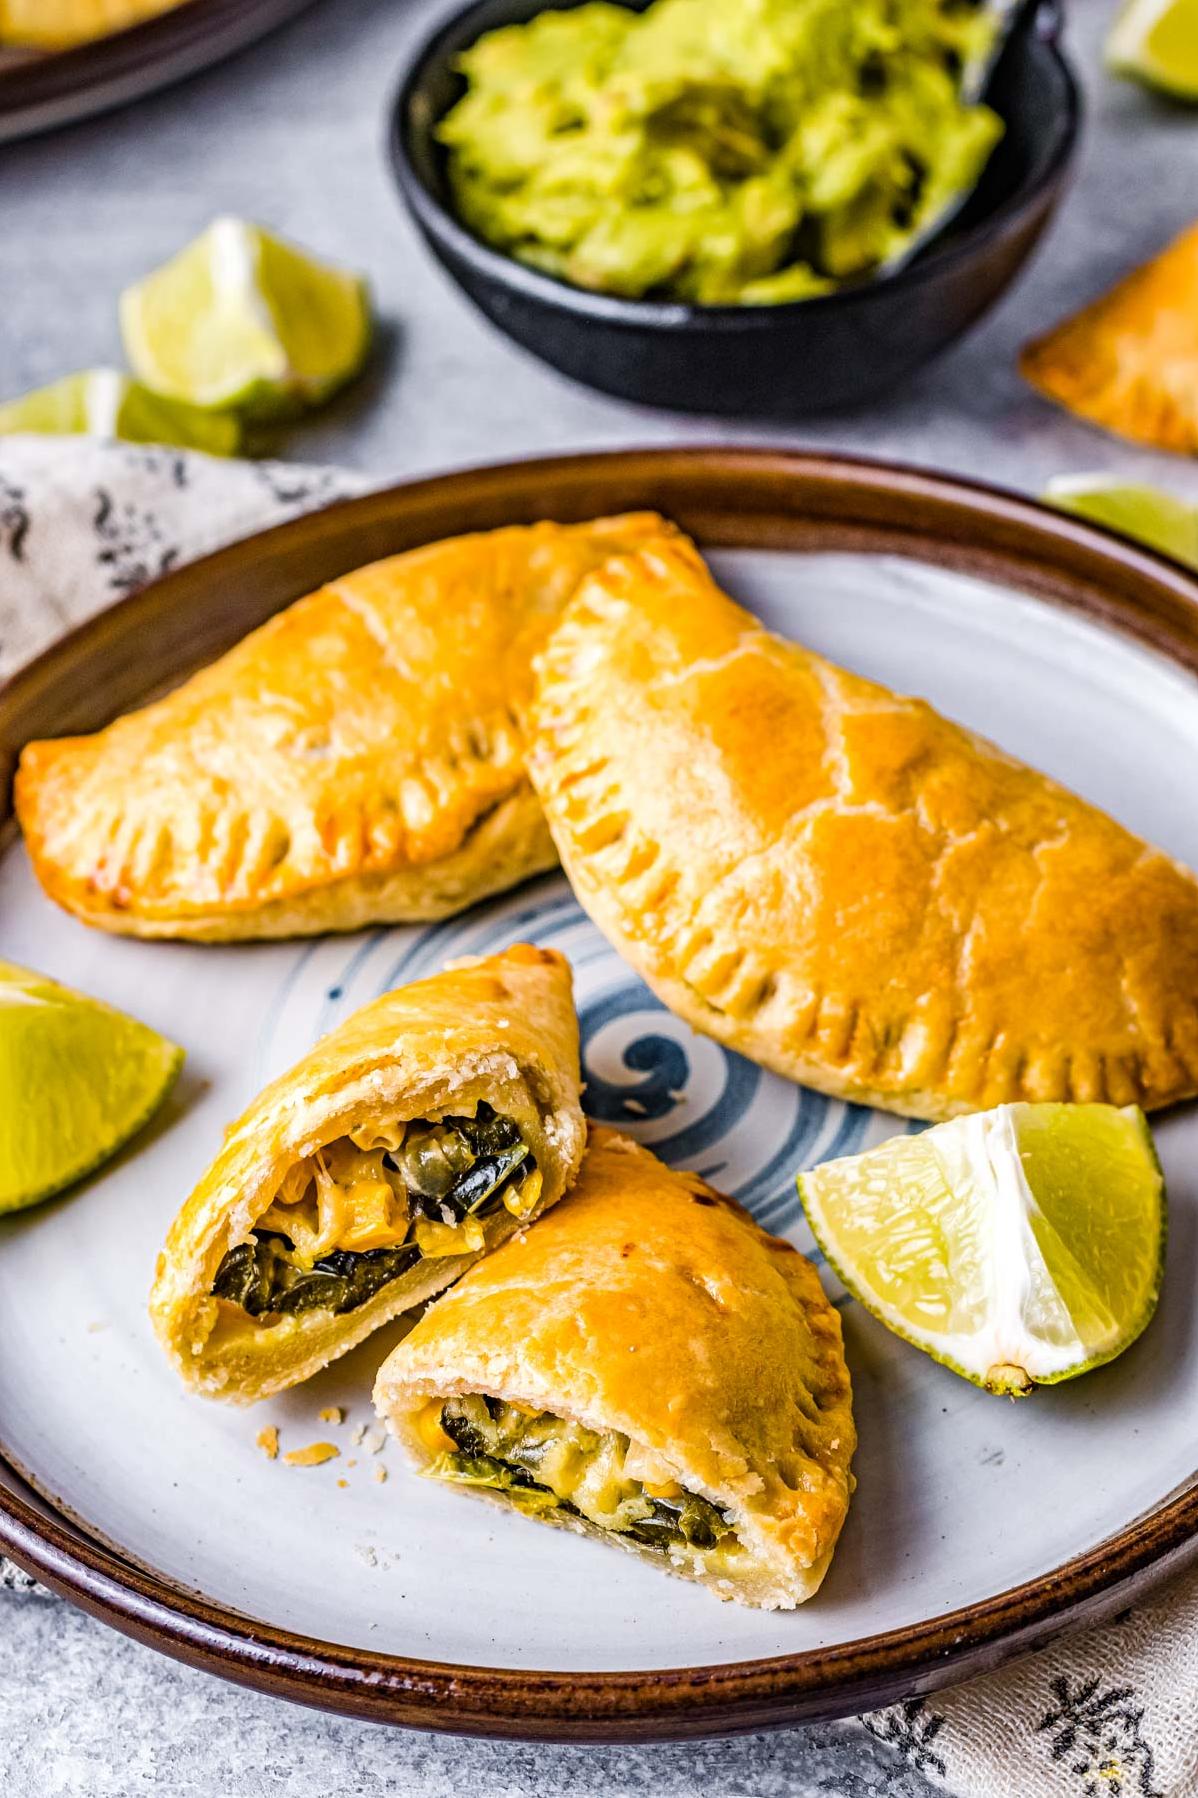  You'll be surprised at how fast these vegetarian empanadas disappear from the plate!